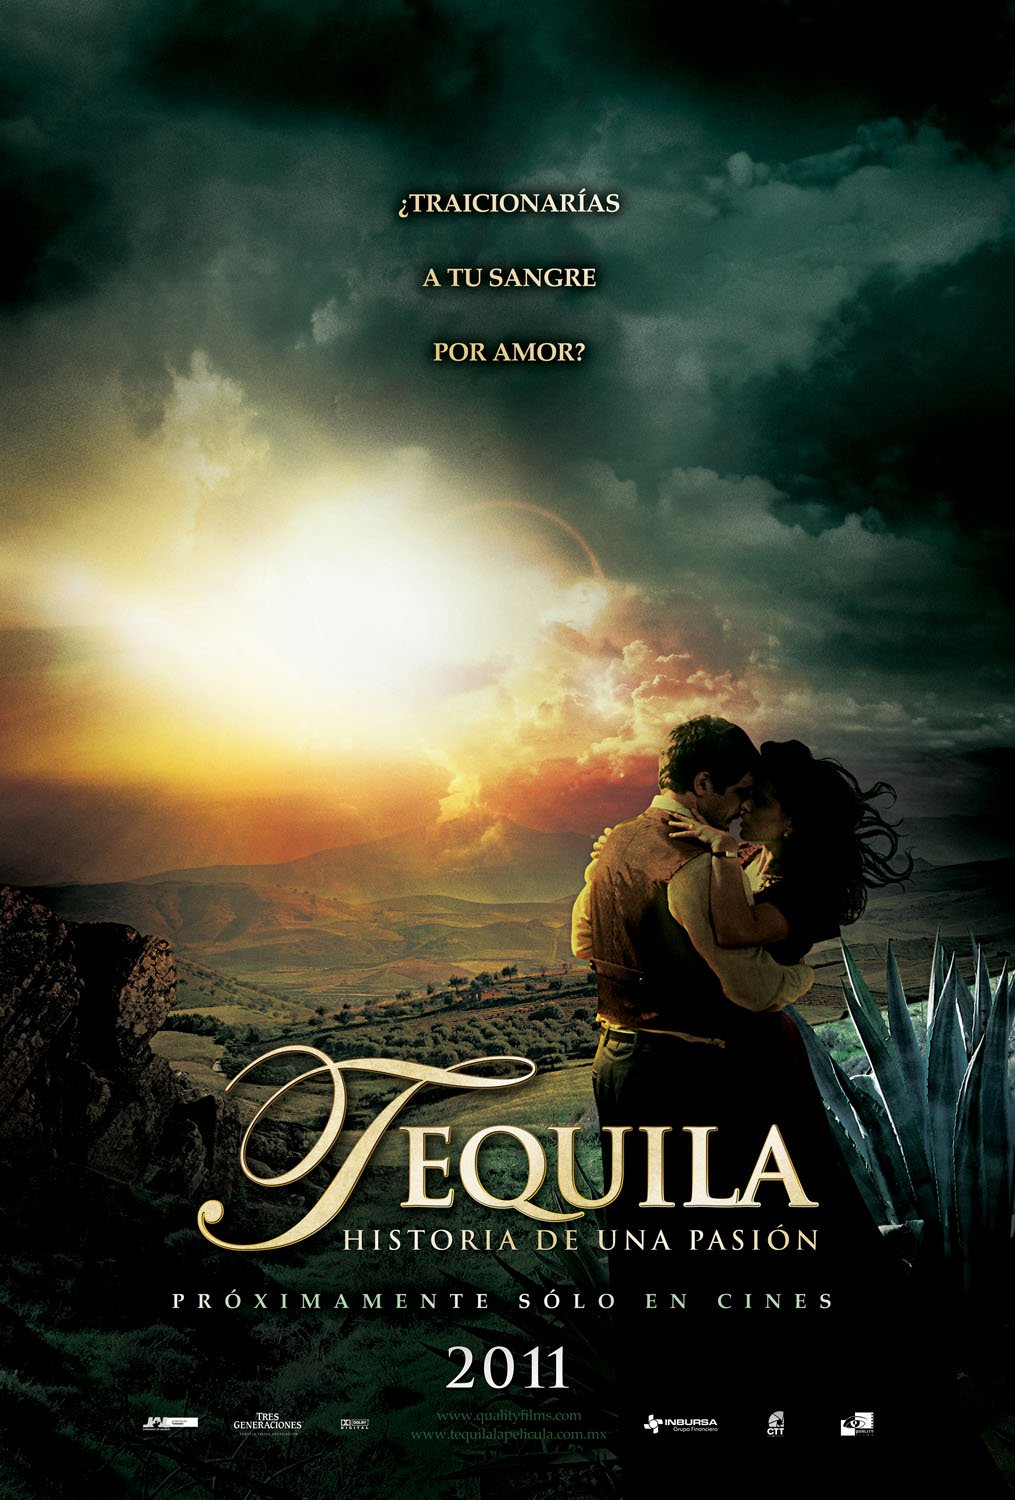 A Tequila Weekend movie